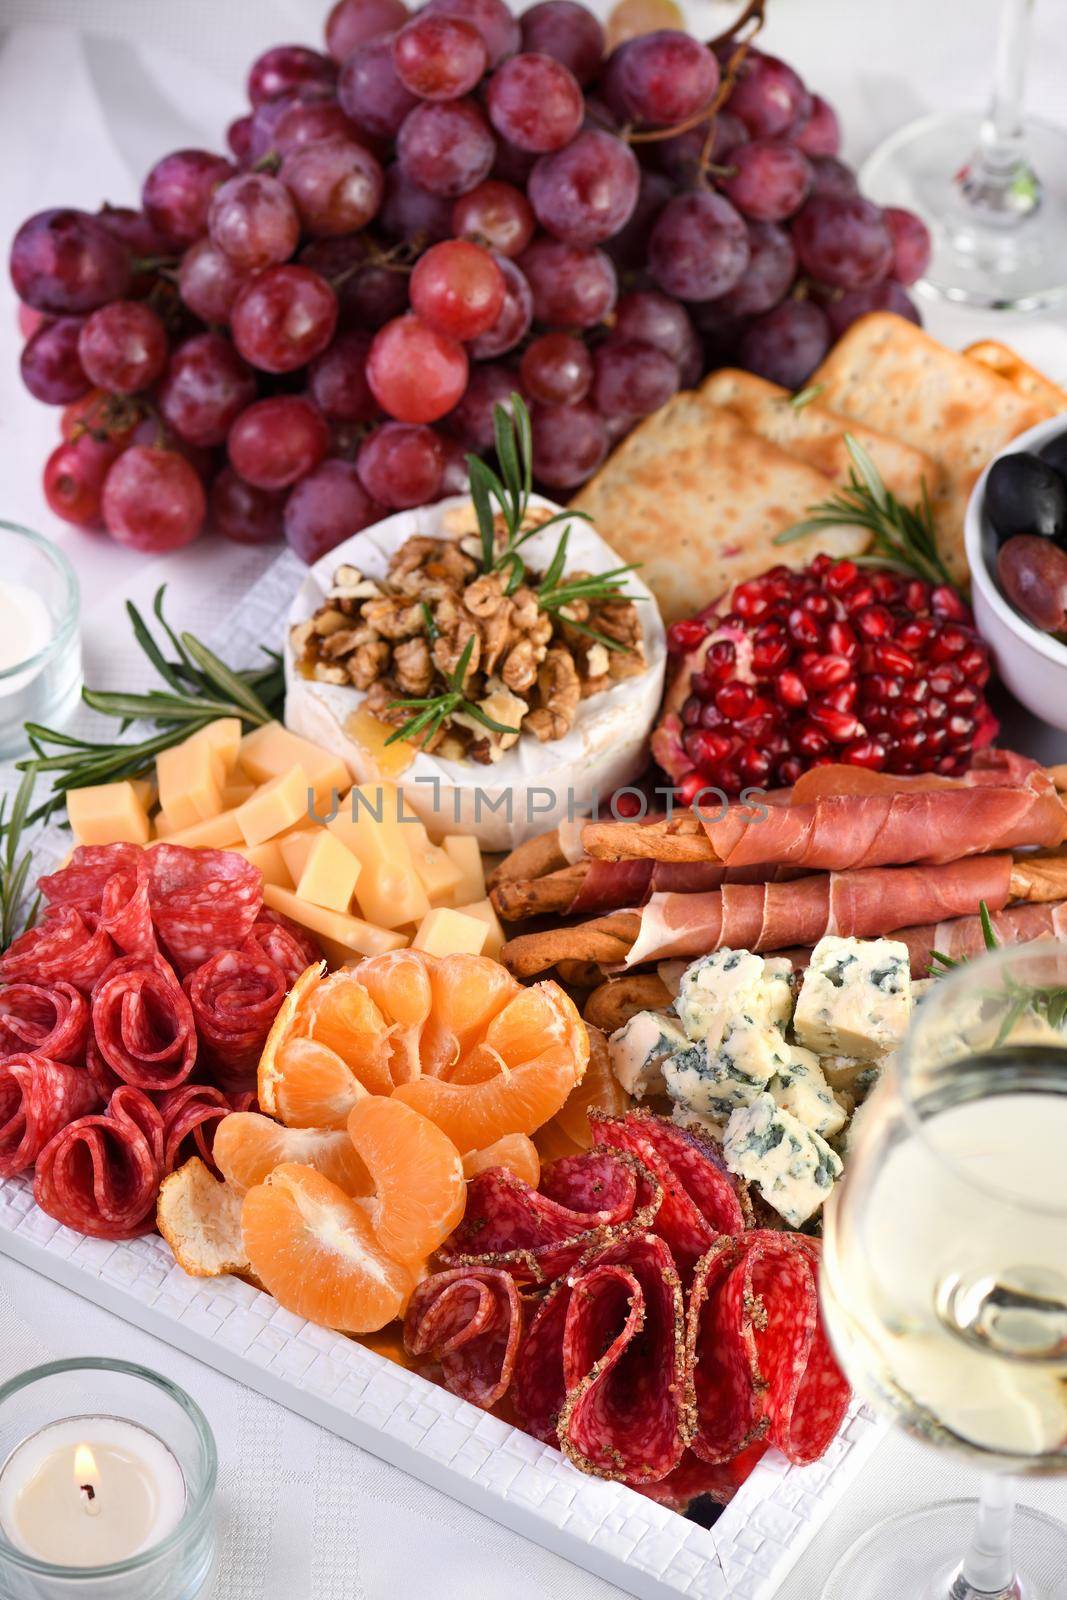 Sausage and cheese antipasto by Apolonia